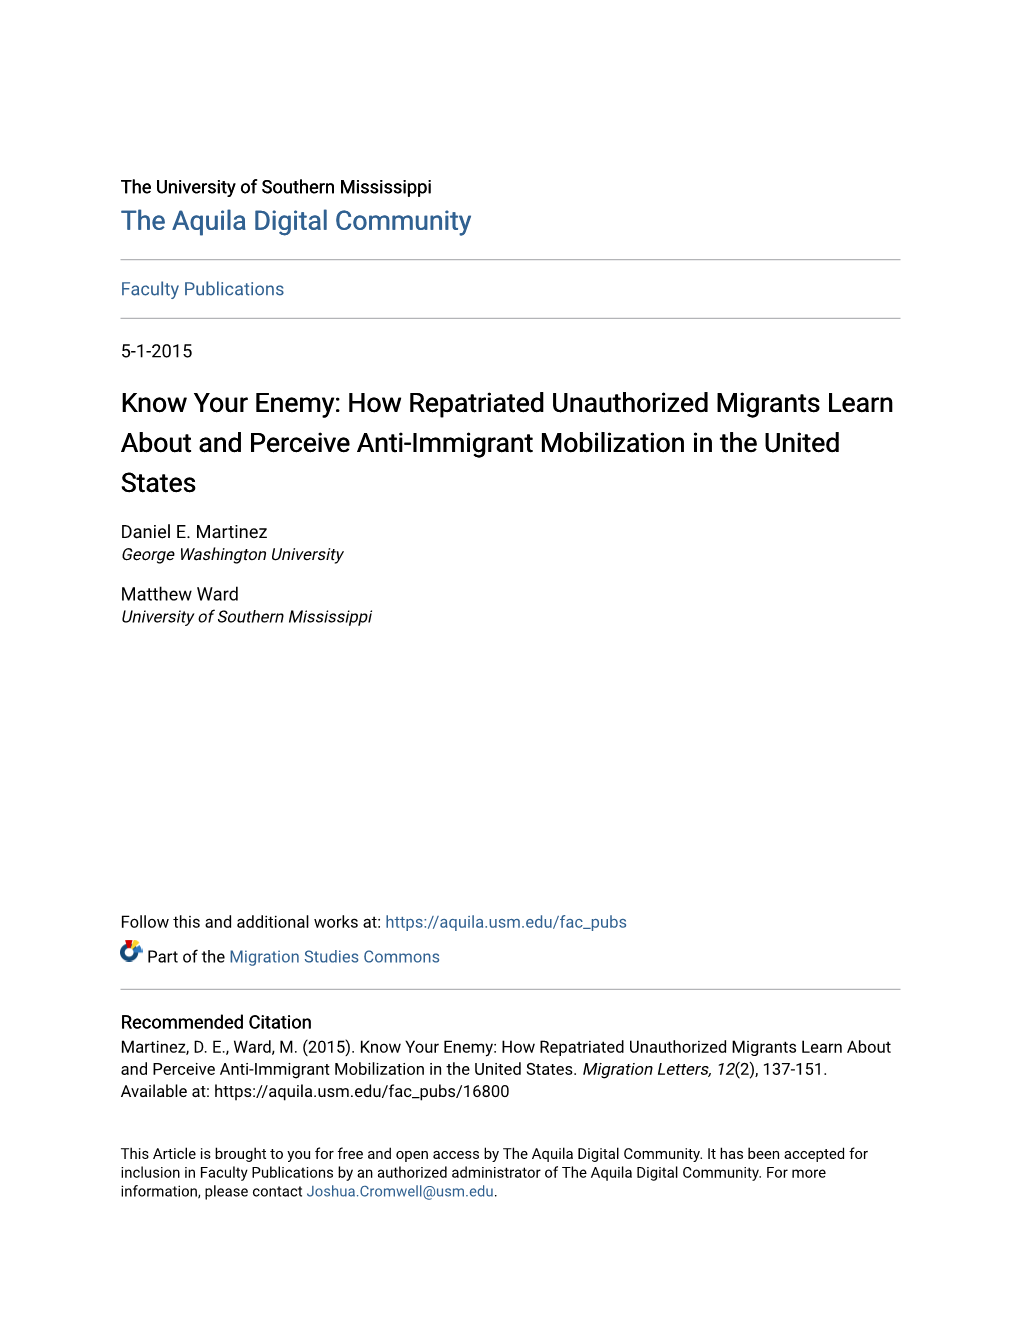 How Repatriated Unauthorized Migrants Learn About and Perceive Anti-Immigrant Mobilization in the United States